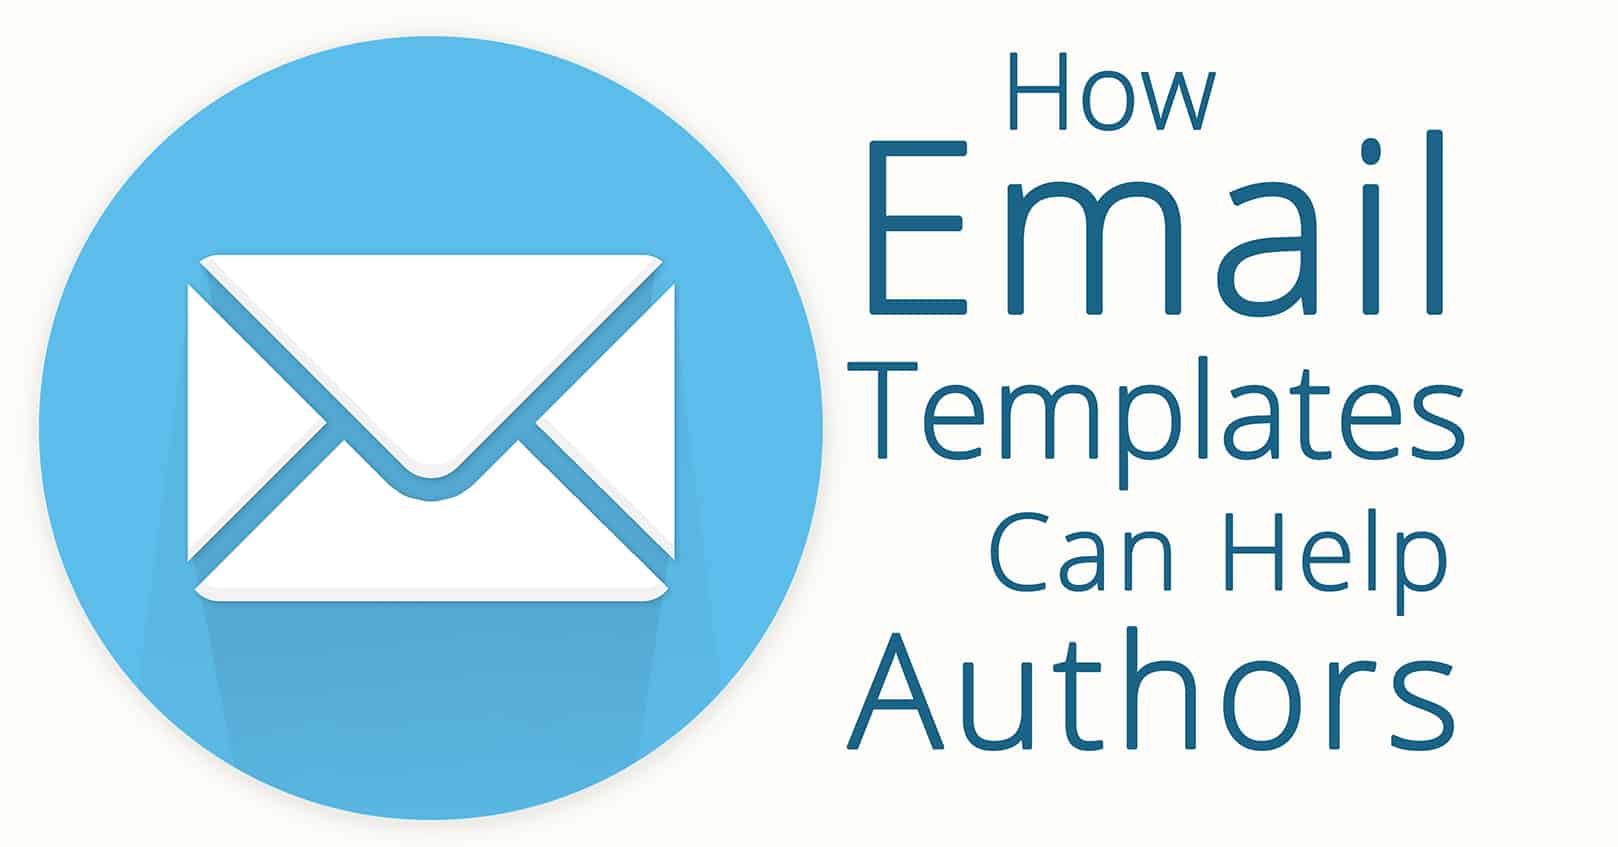 email templates can help authors